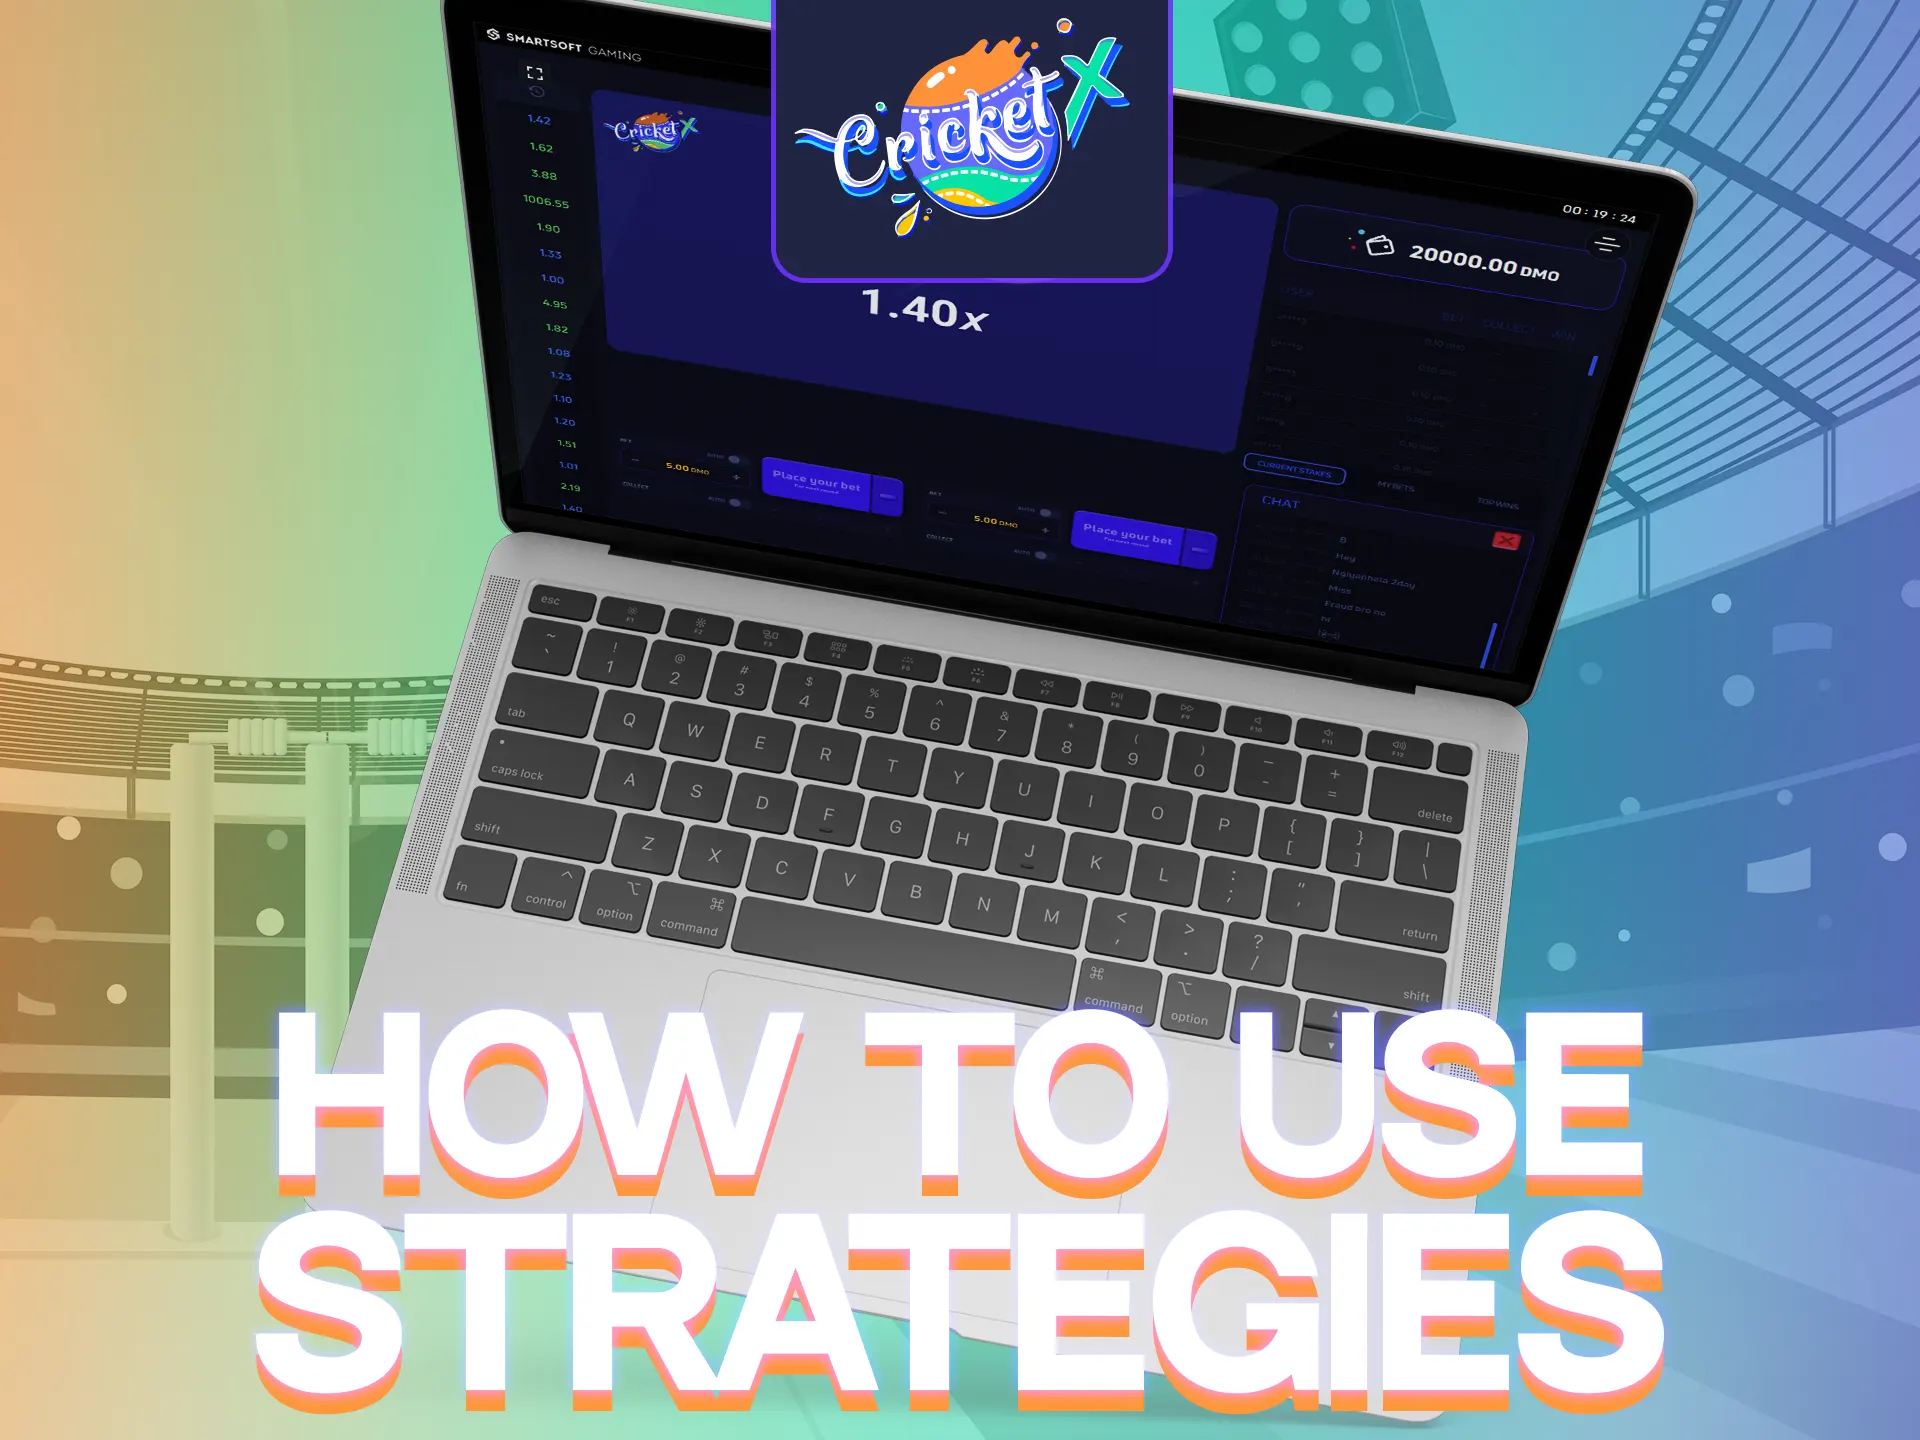 Learn how to use strategies in the Cricket-X game.